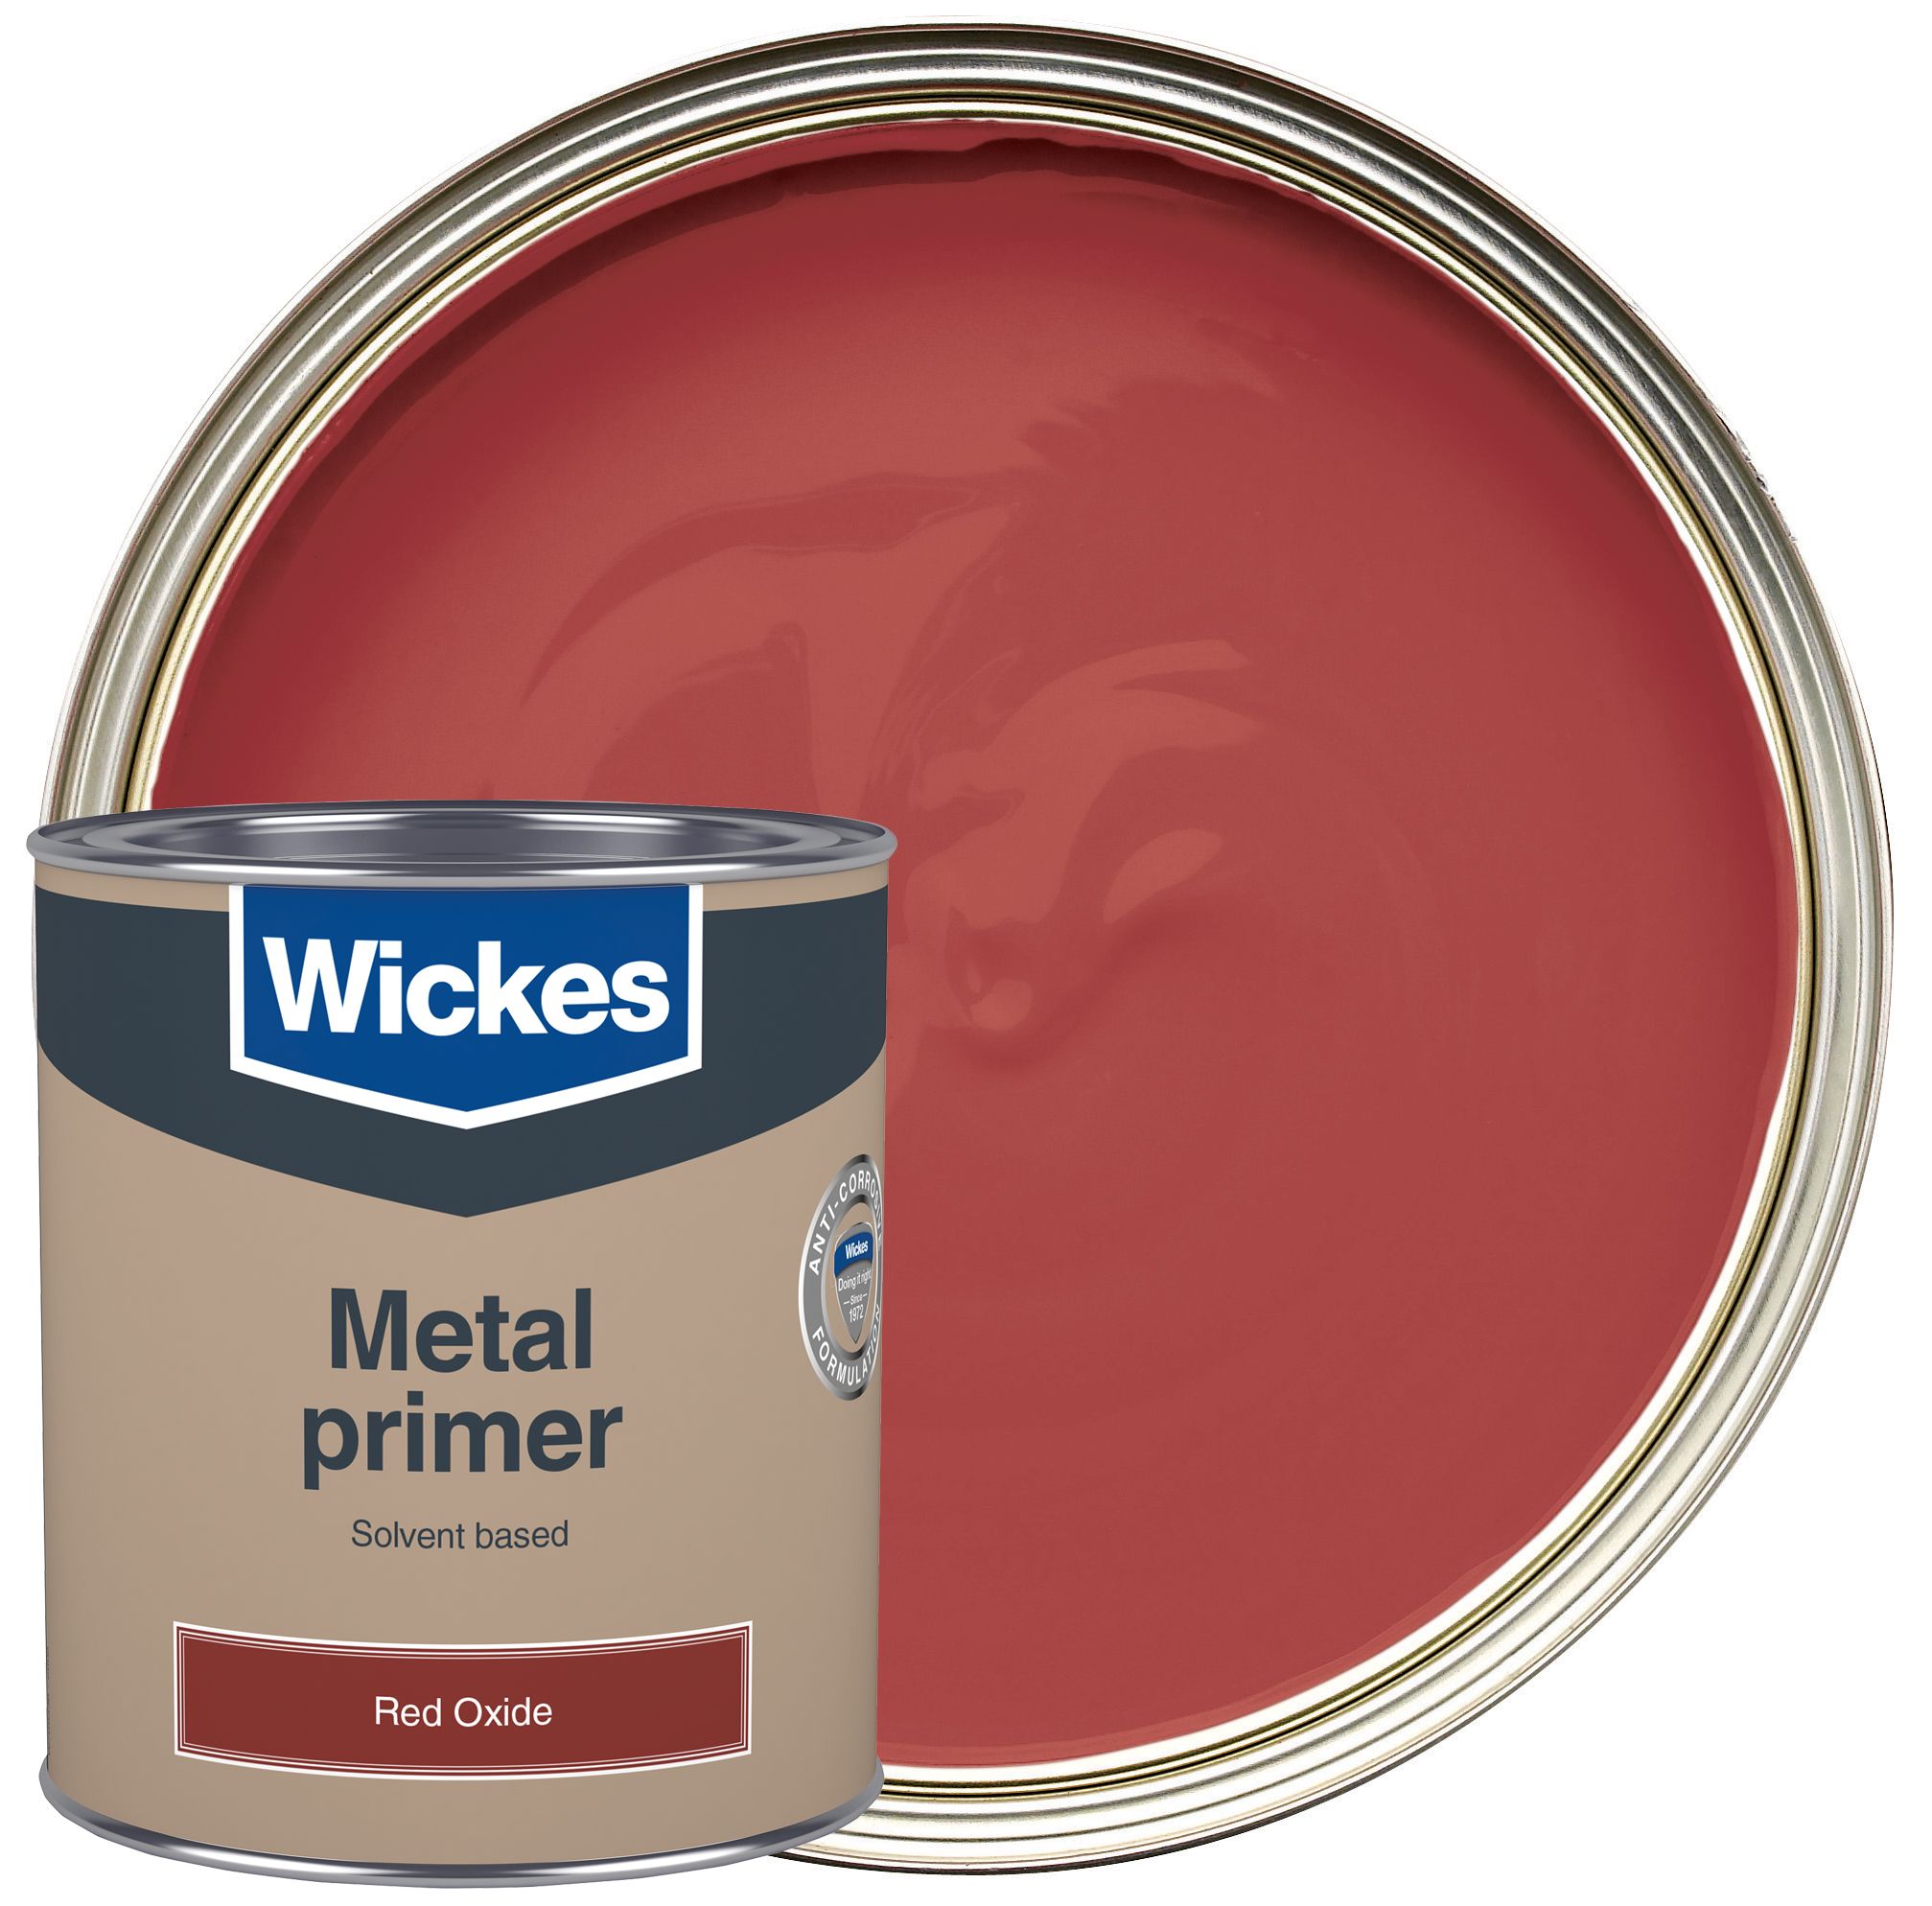 Wickes Red Oxide Metal Primer Paint - 750ml